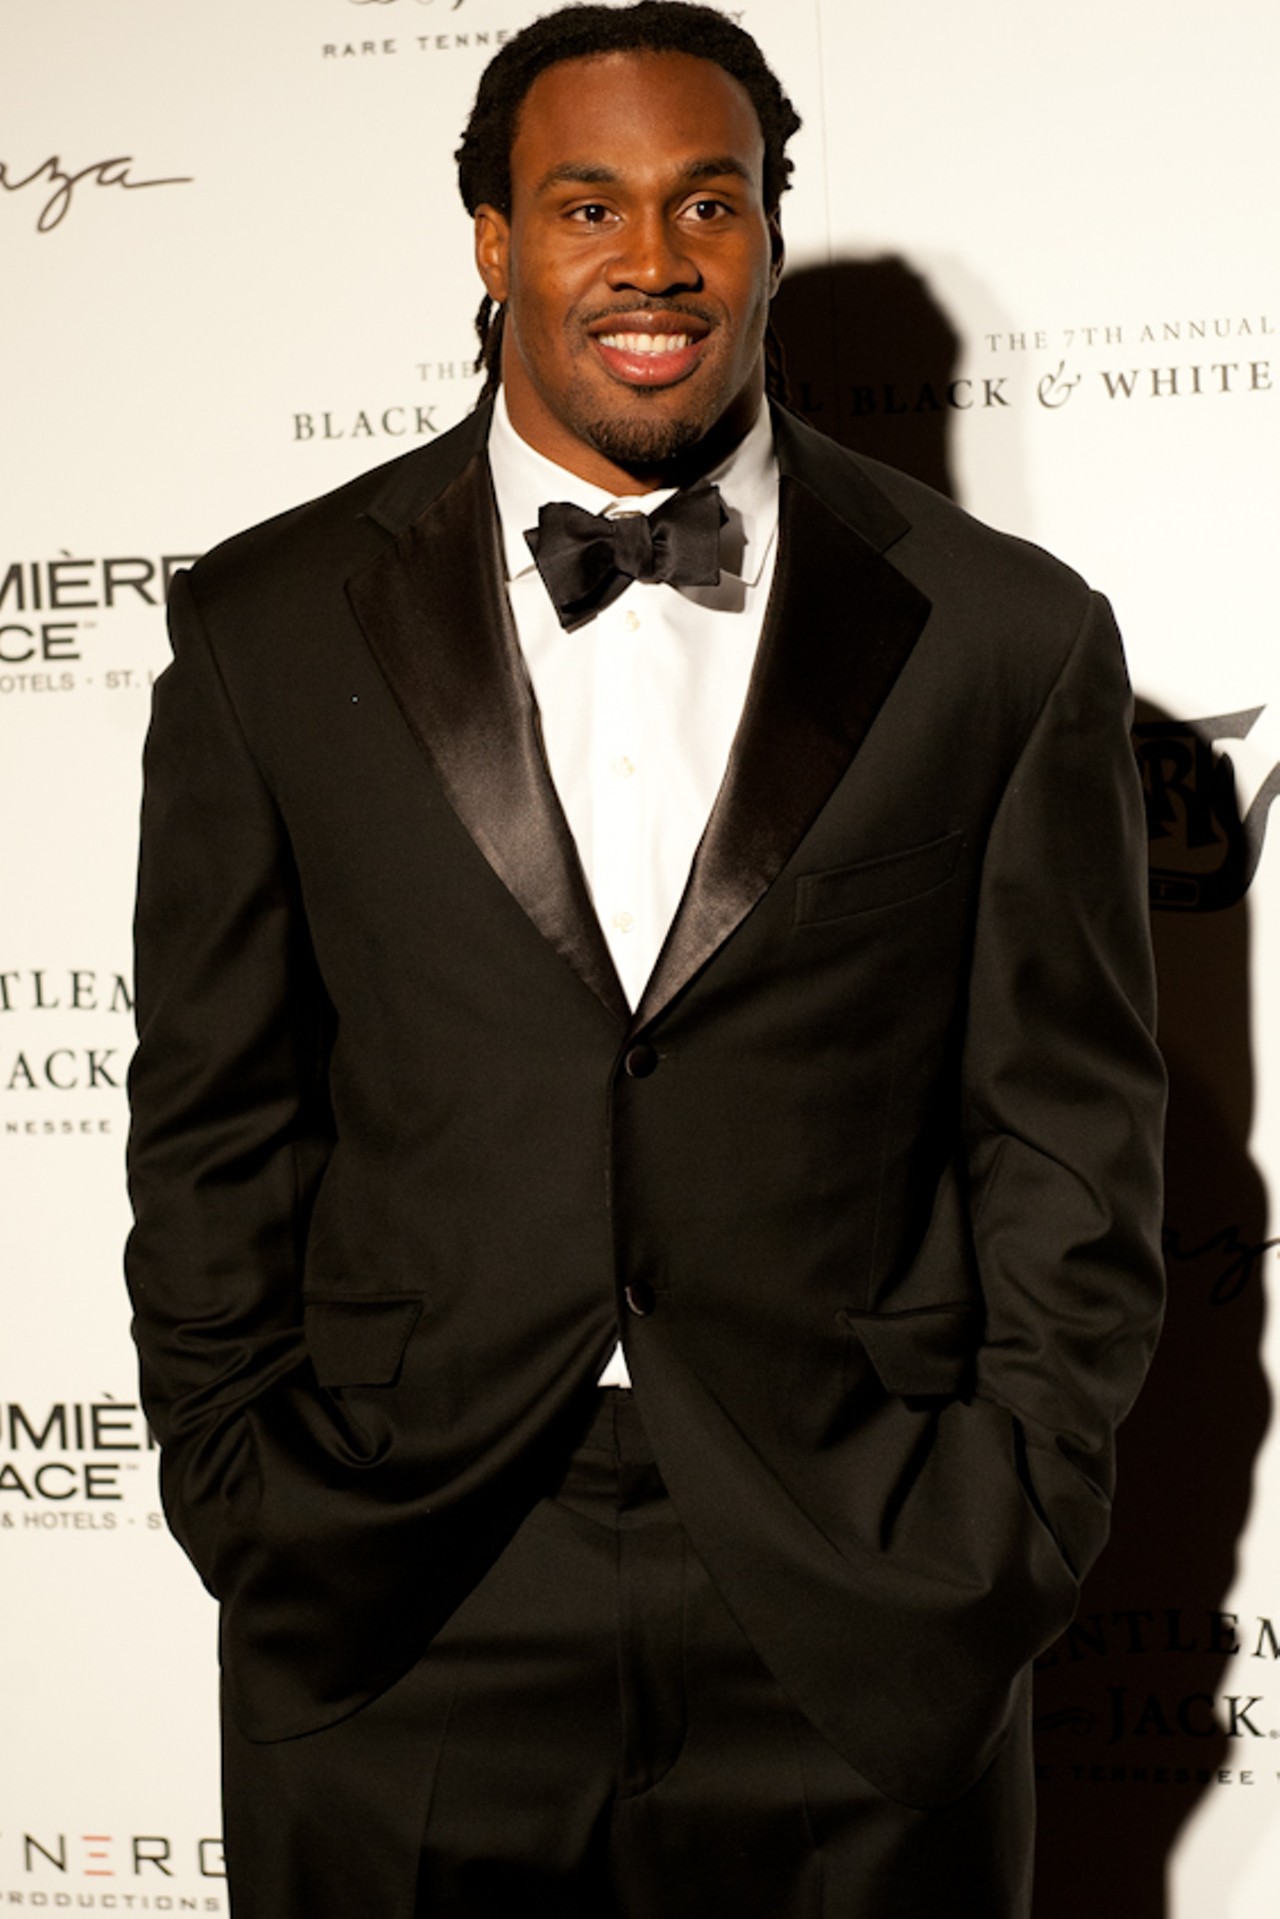 Nelly's 2012 Black and White Ball